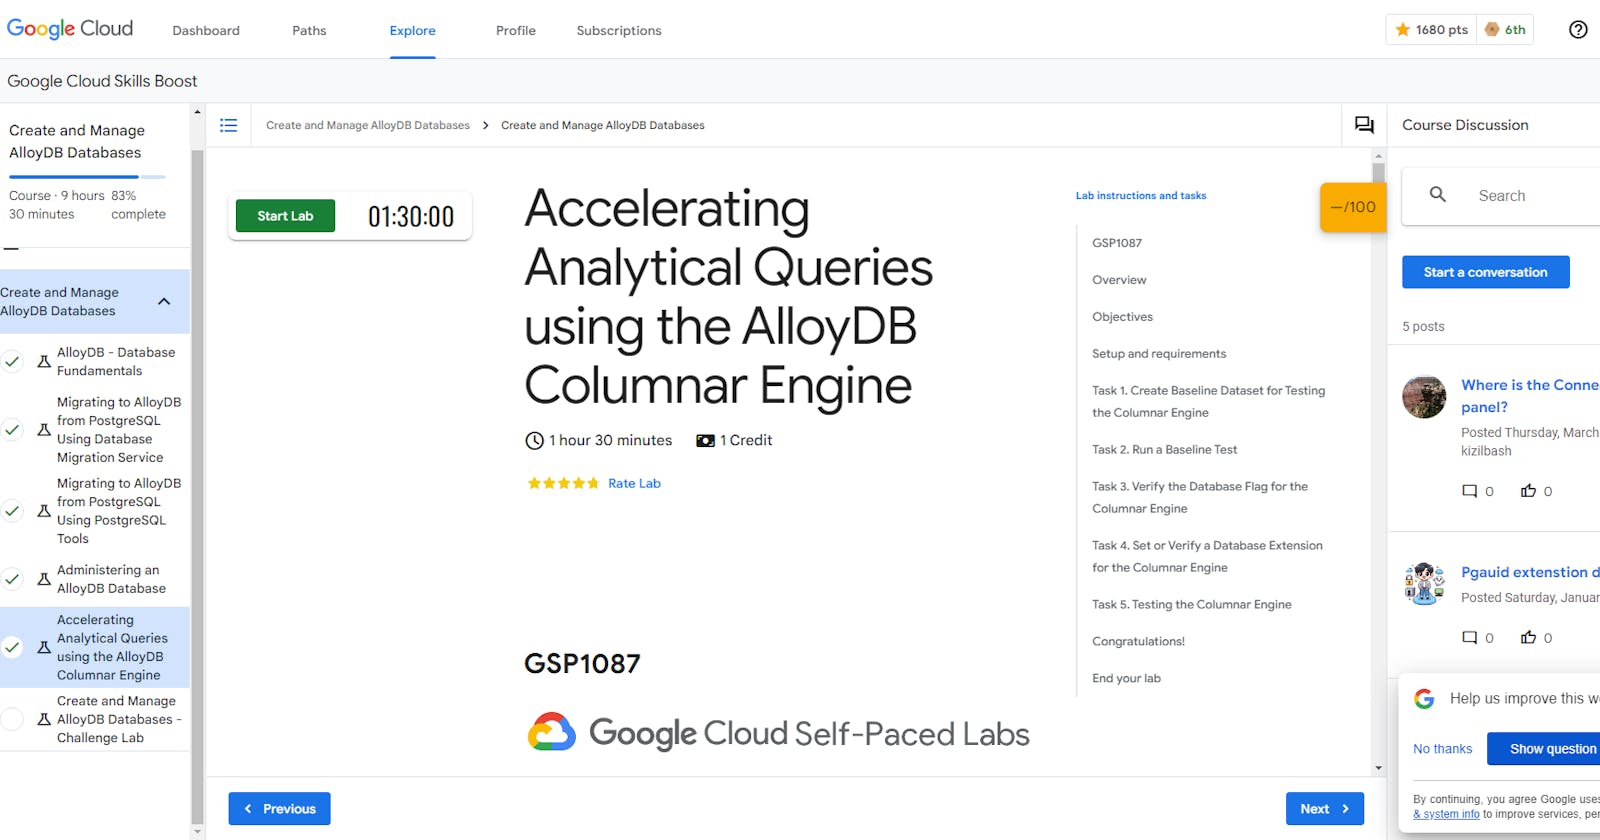 Accelerating Analytical Queries using the AlloyDB Columnar Engine